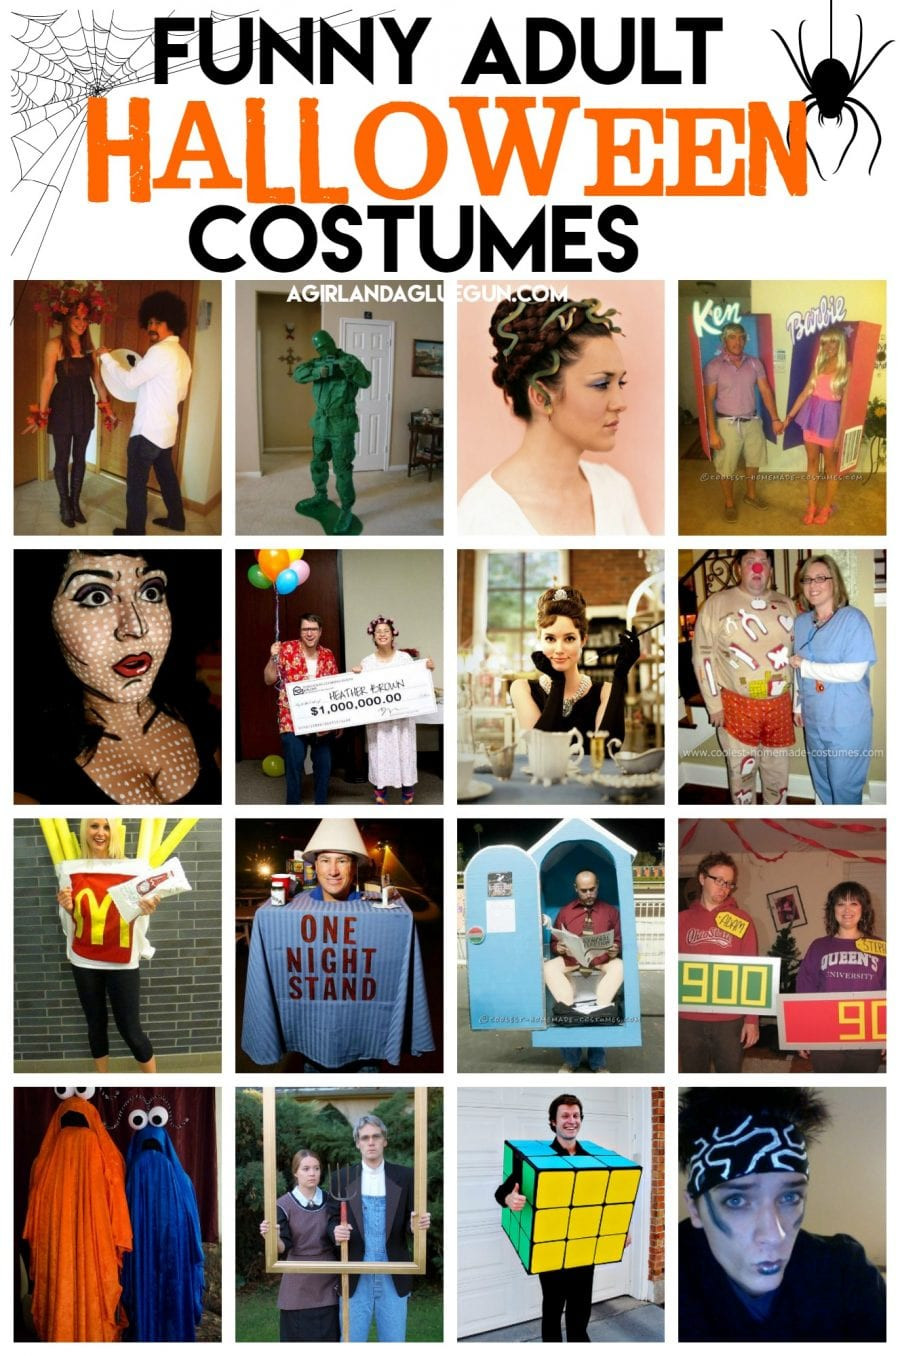 Funny DIY Costumes
 Funny Halloween Costumes for Adults that you can DIY A